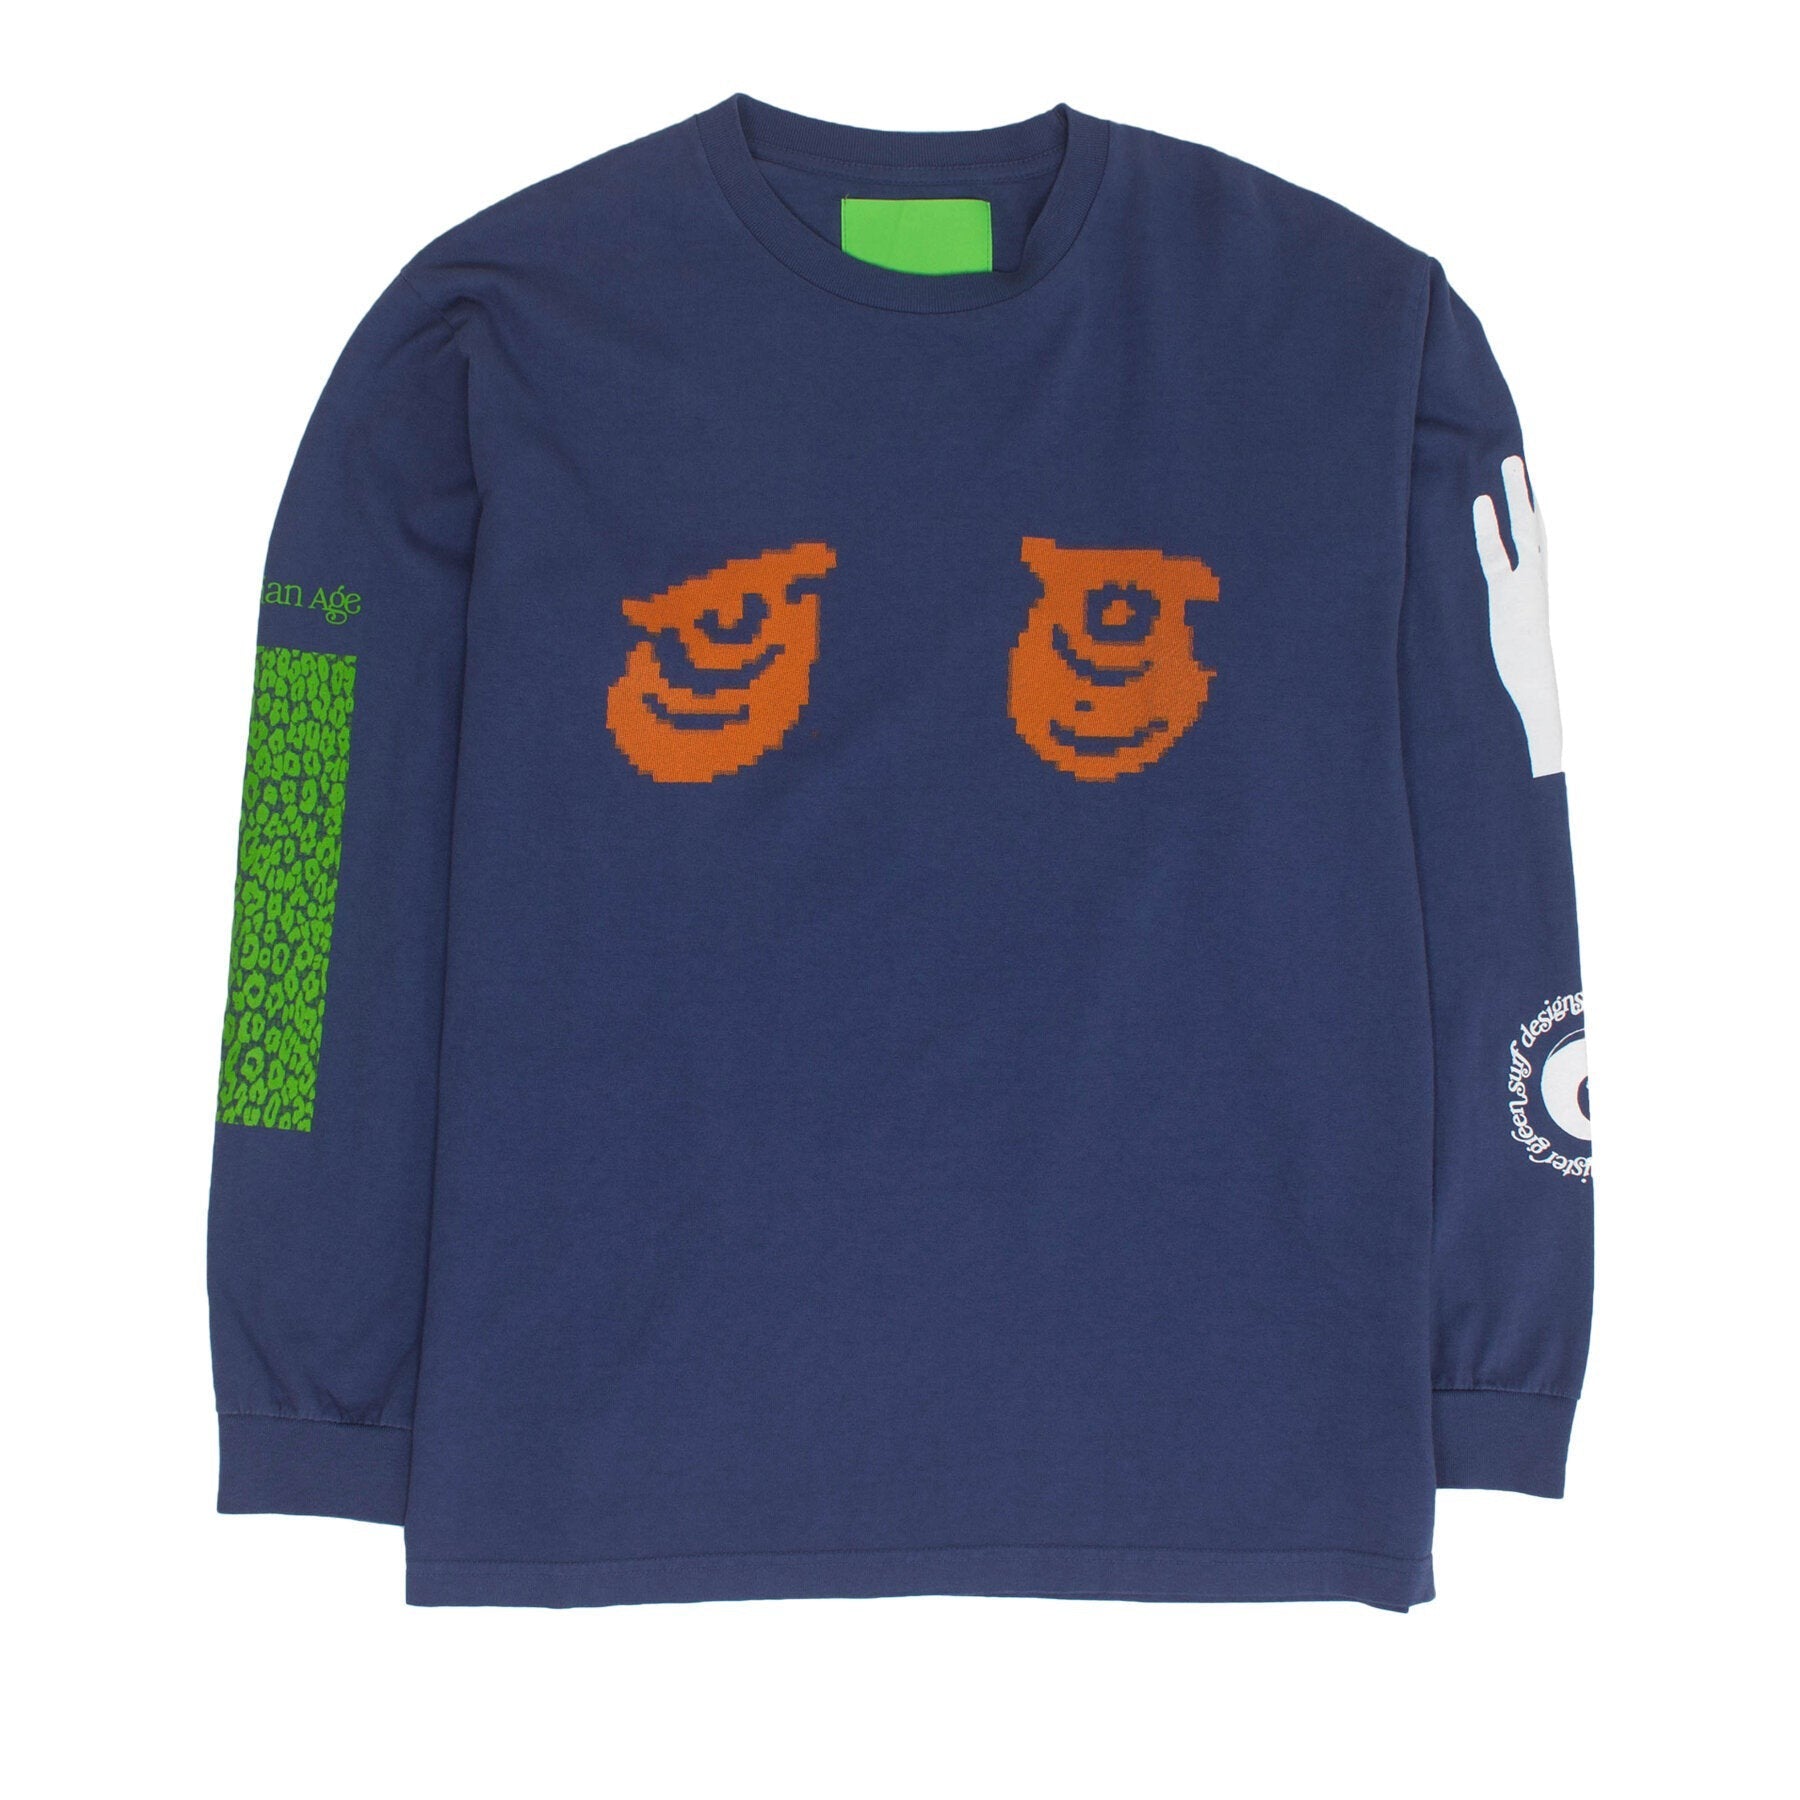 Aquarian Collage L/S Tee - Washed Navy-Mister Green-Mister Green